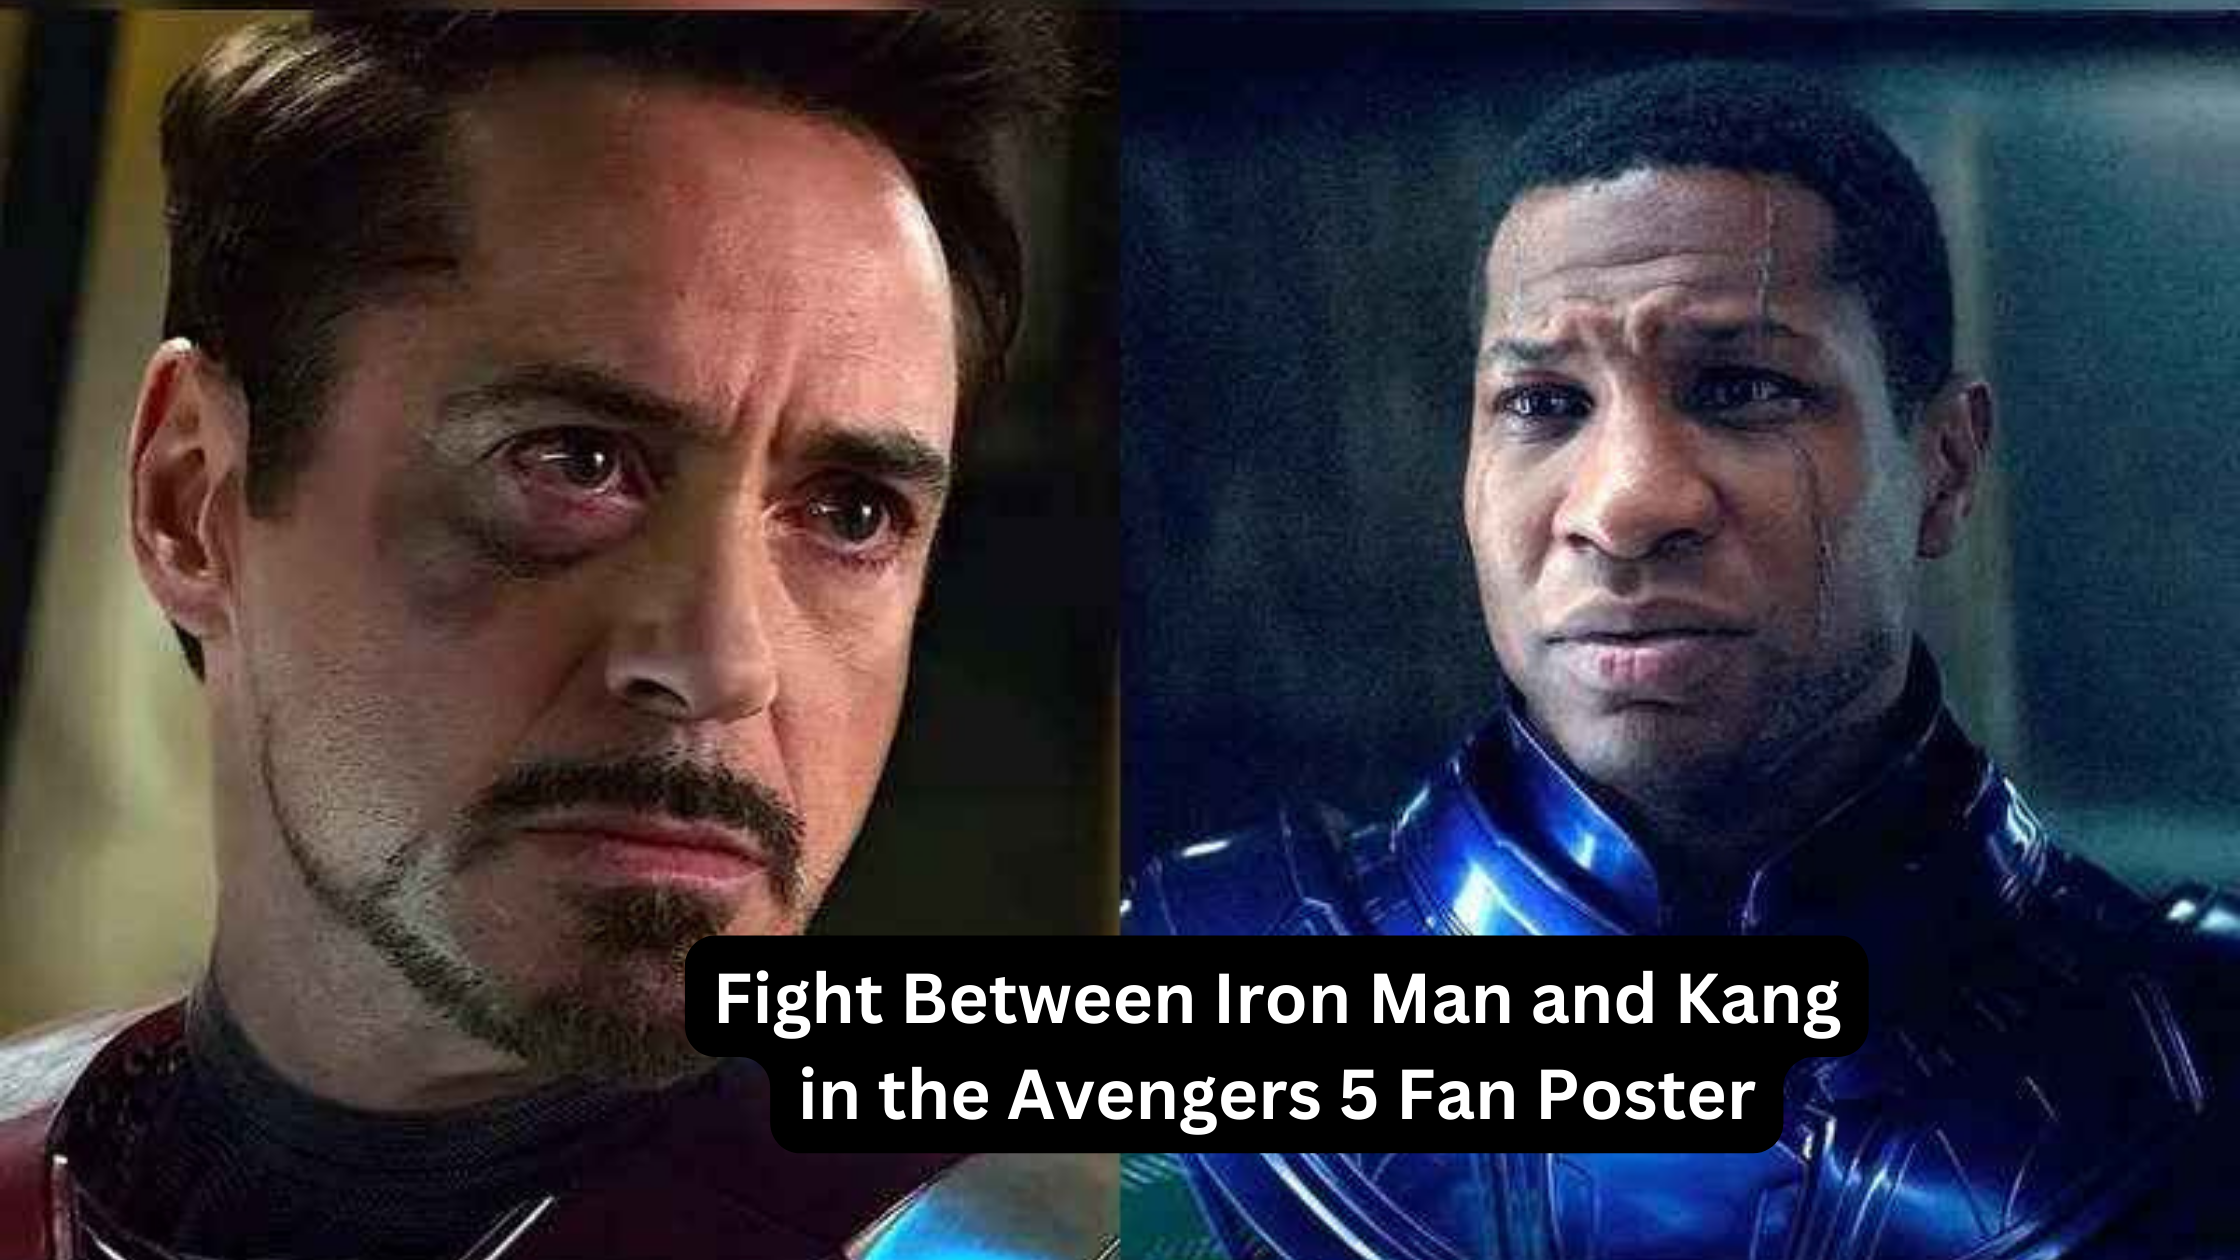 Fight Between Iron Man and Kang in the Avengers 5 Fan Poster